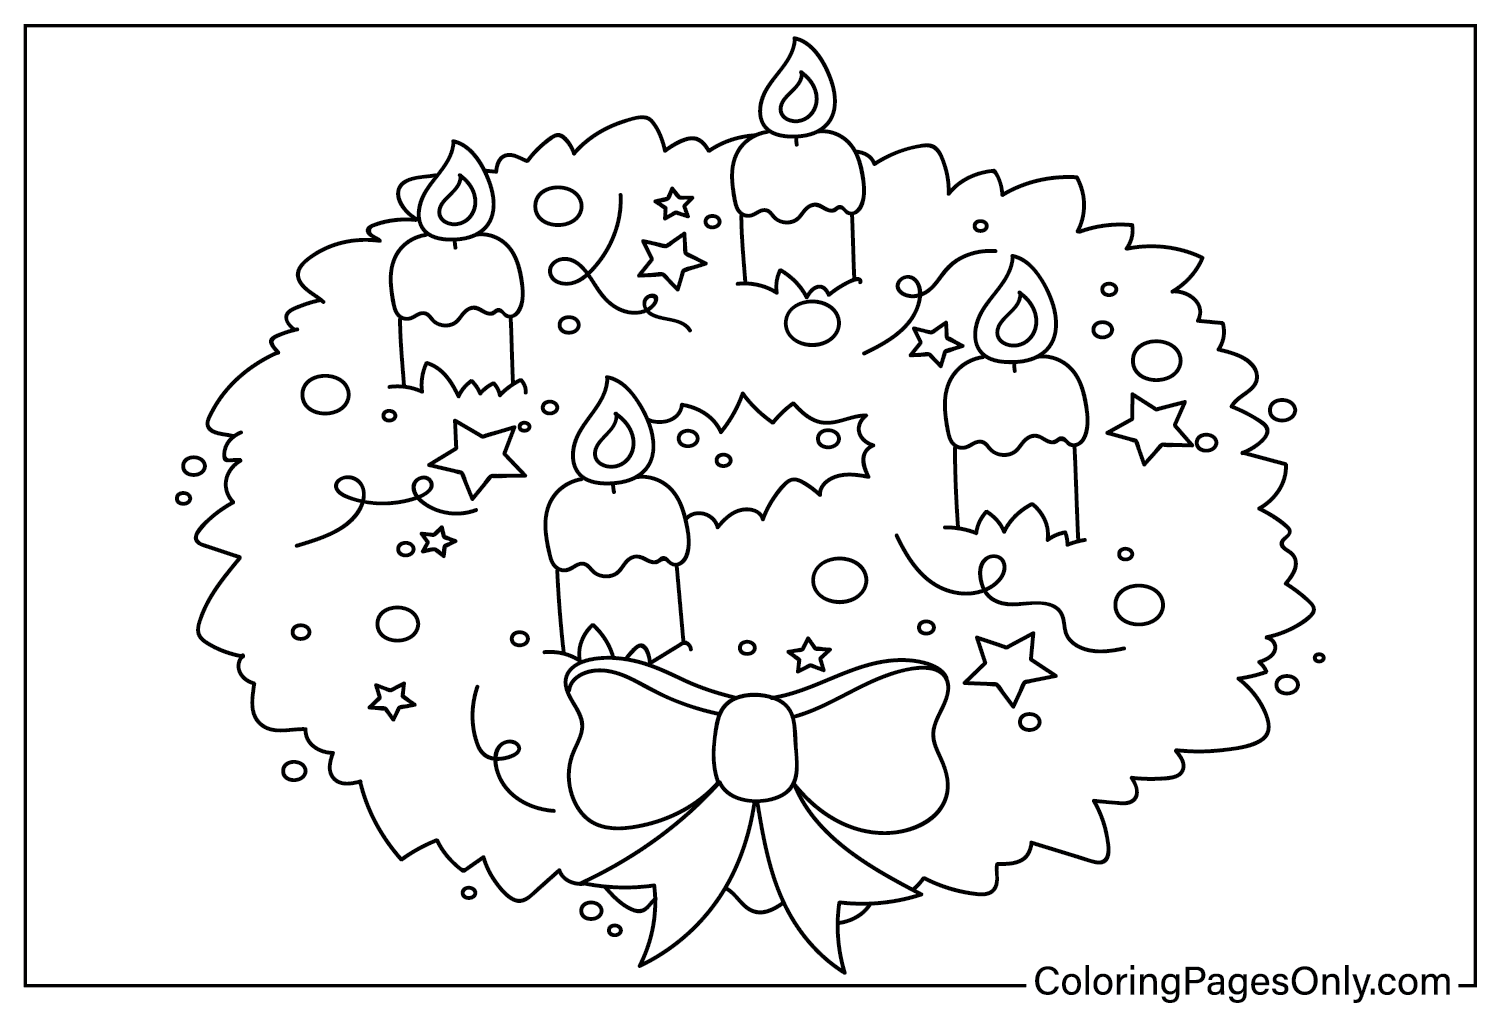 23 Advent Wreath Coloring Pages - ColoringPagesOnly.com